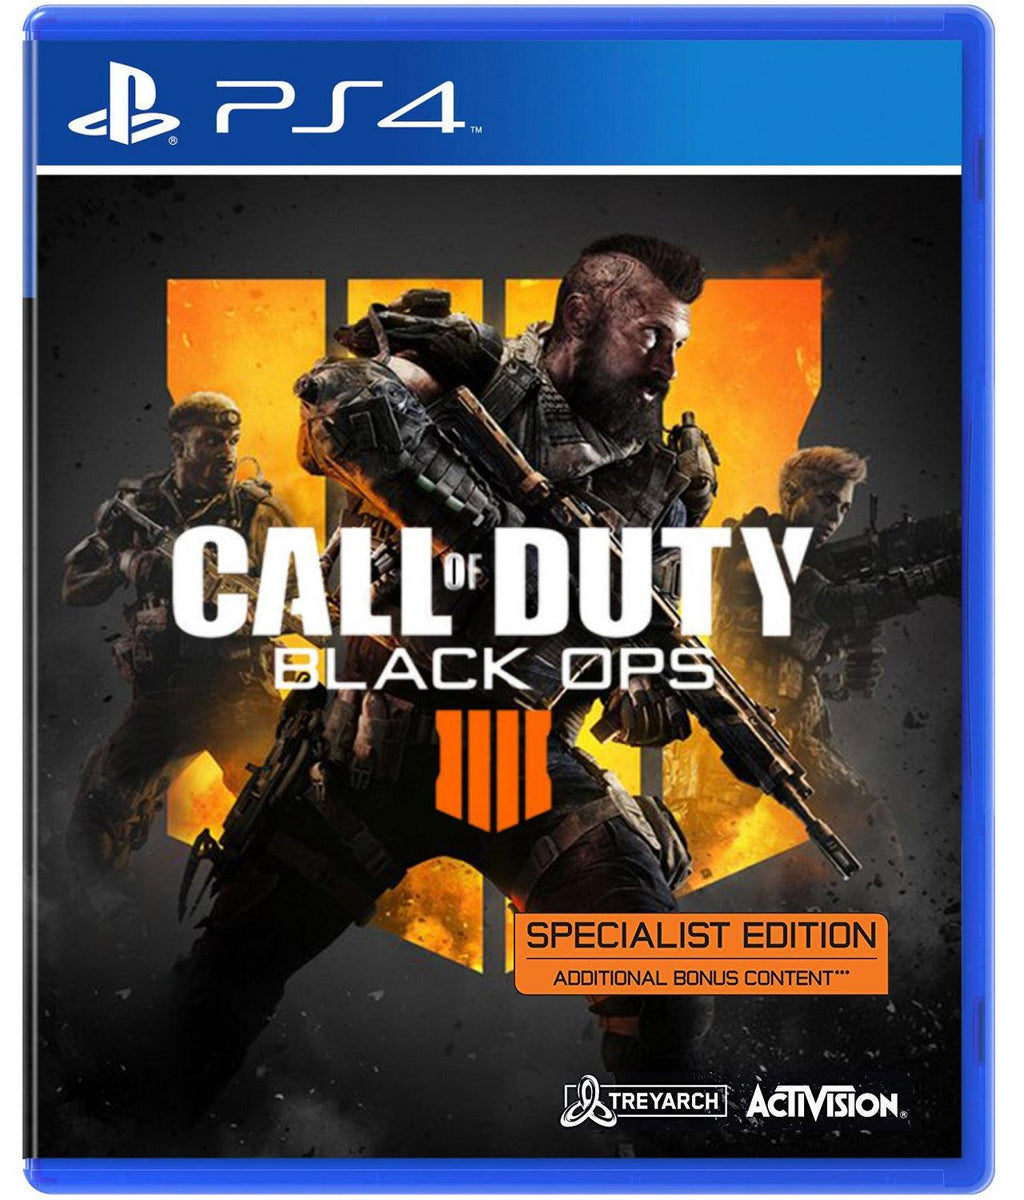 playstation call of duty black ops 4